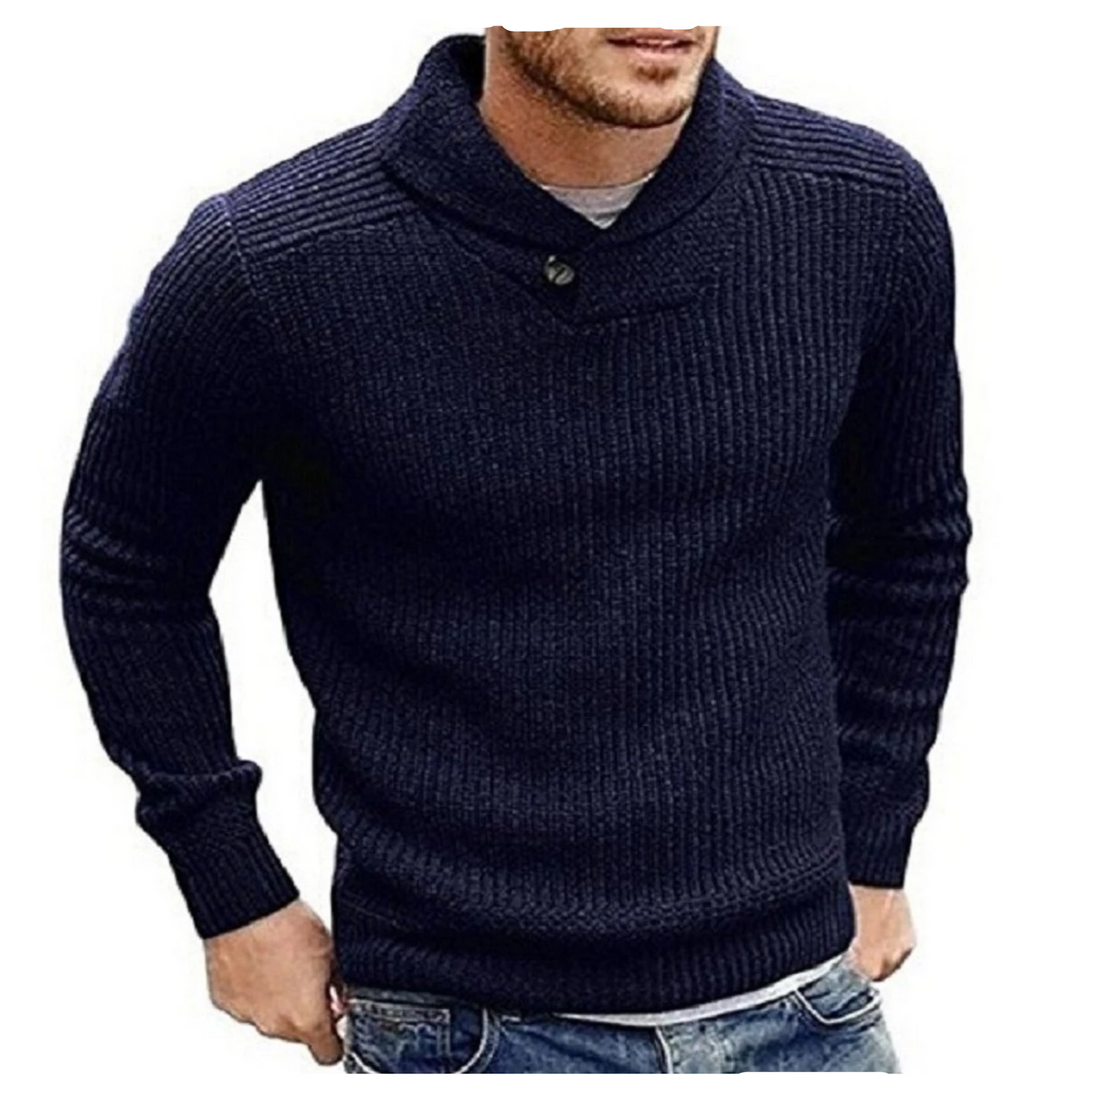 Men's Winter Casual Warm Knitted Sweater